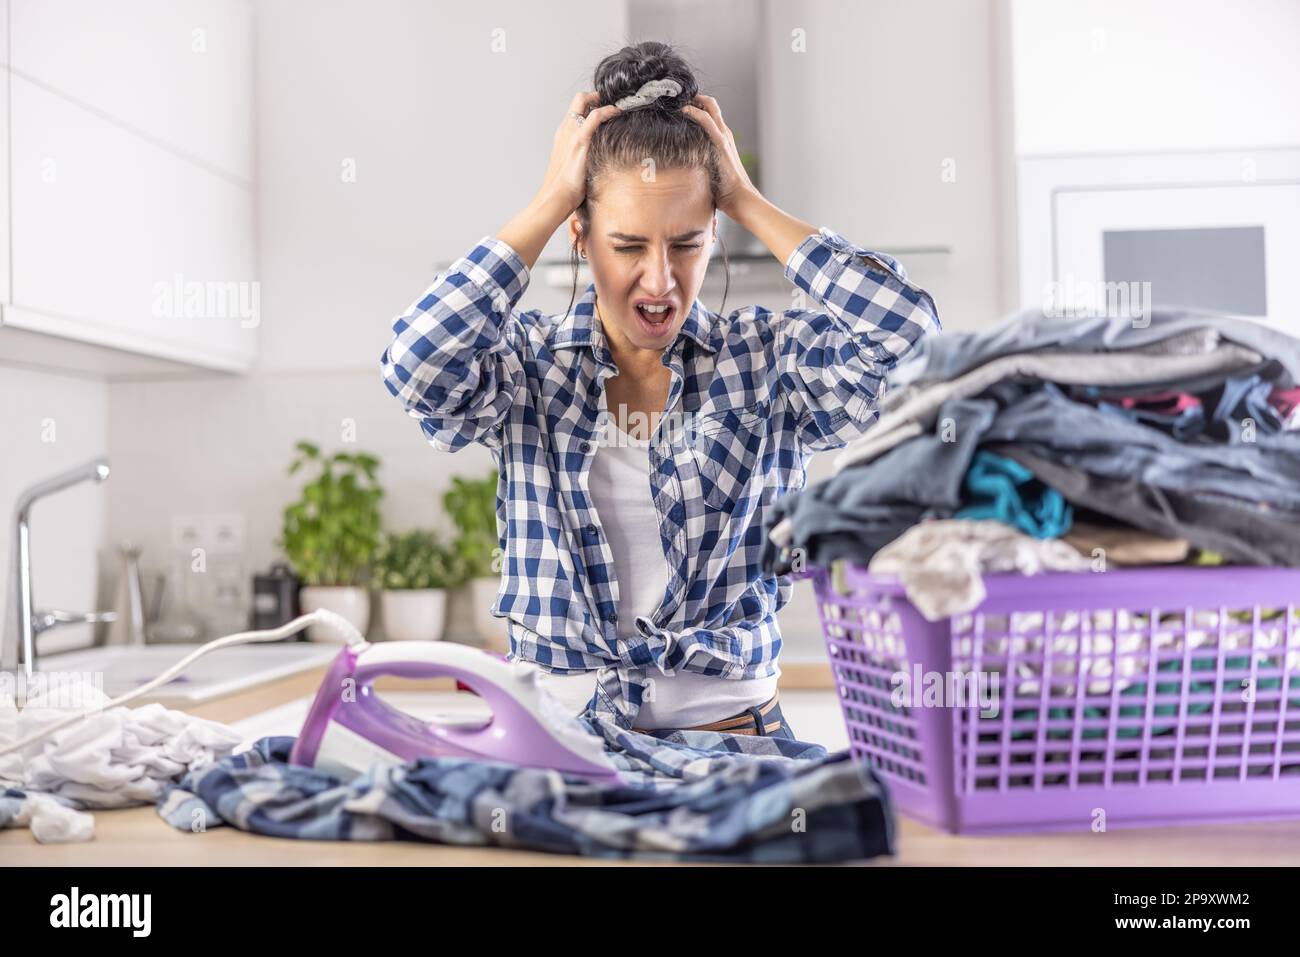 Woman shouts from anger and holds her head as she is frustrated from house chores and the pile of clothes she needs to iron. Stock Photo